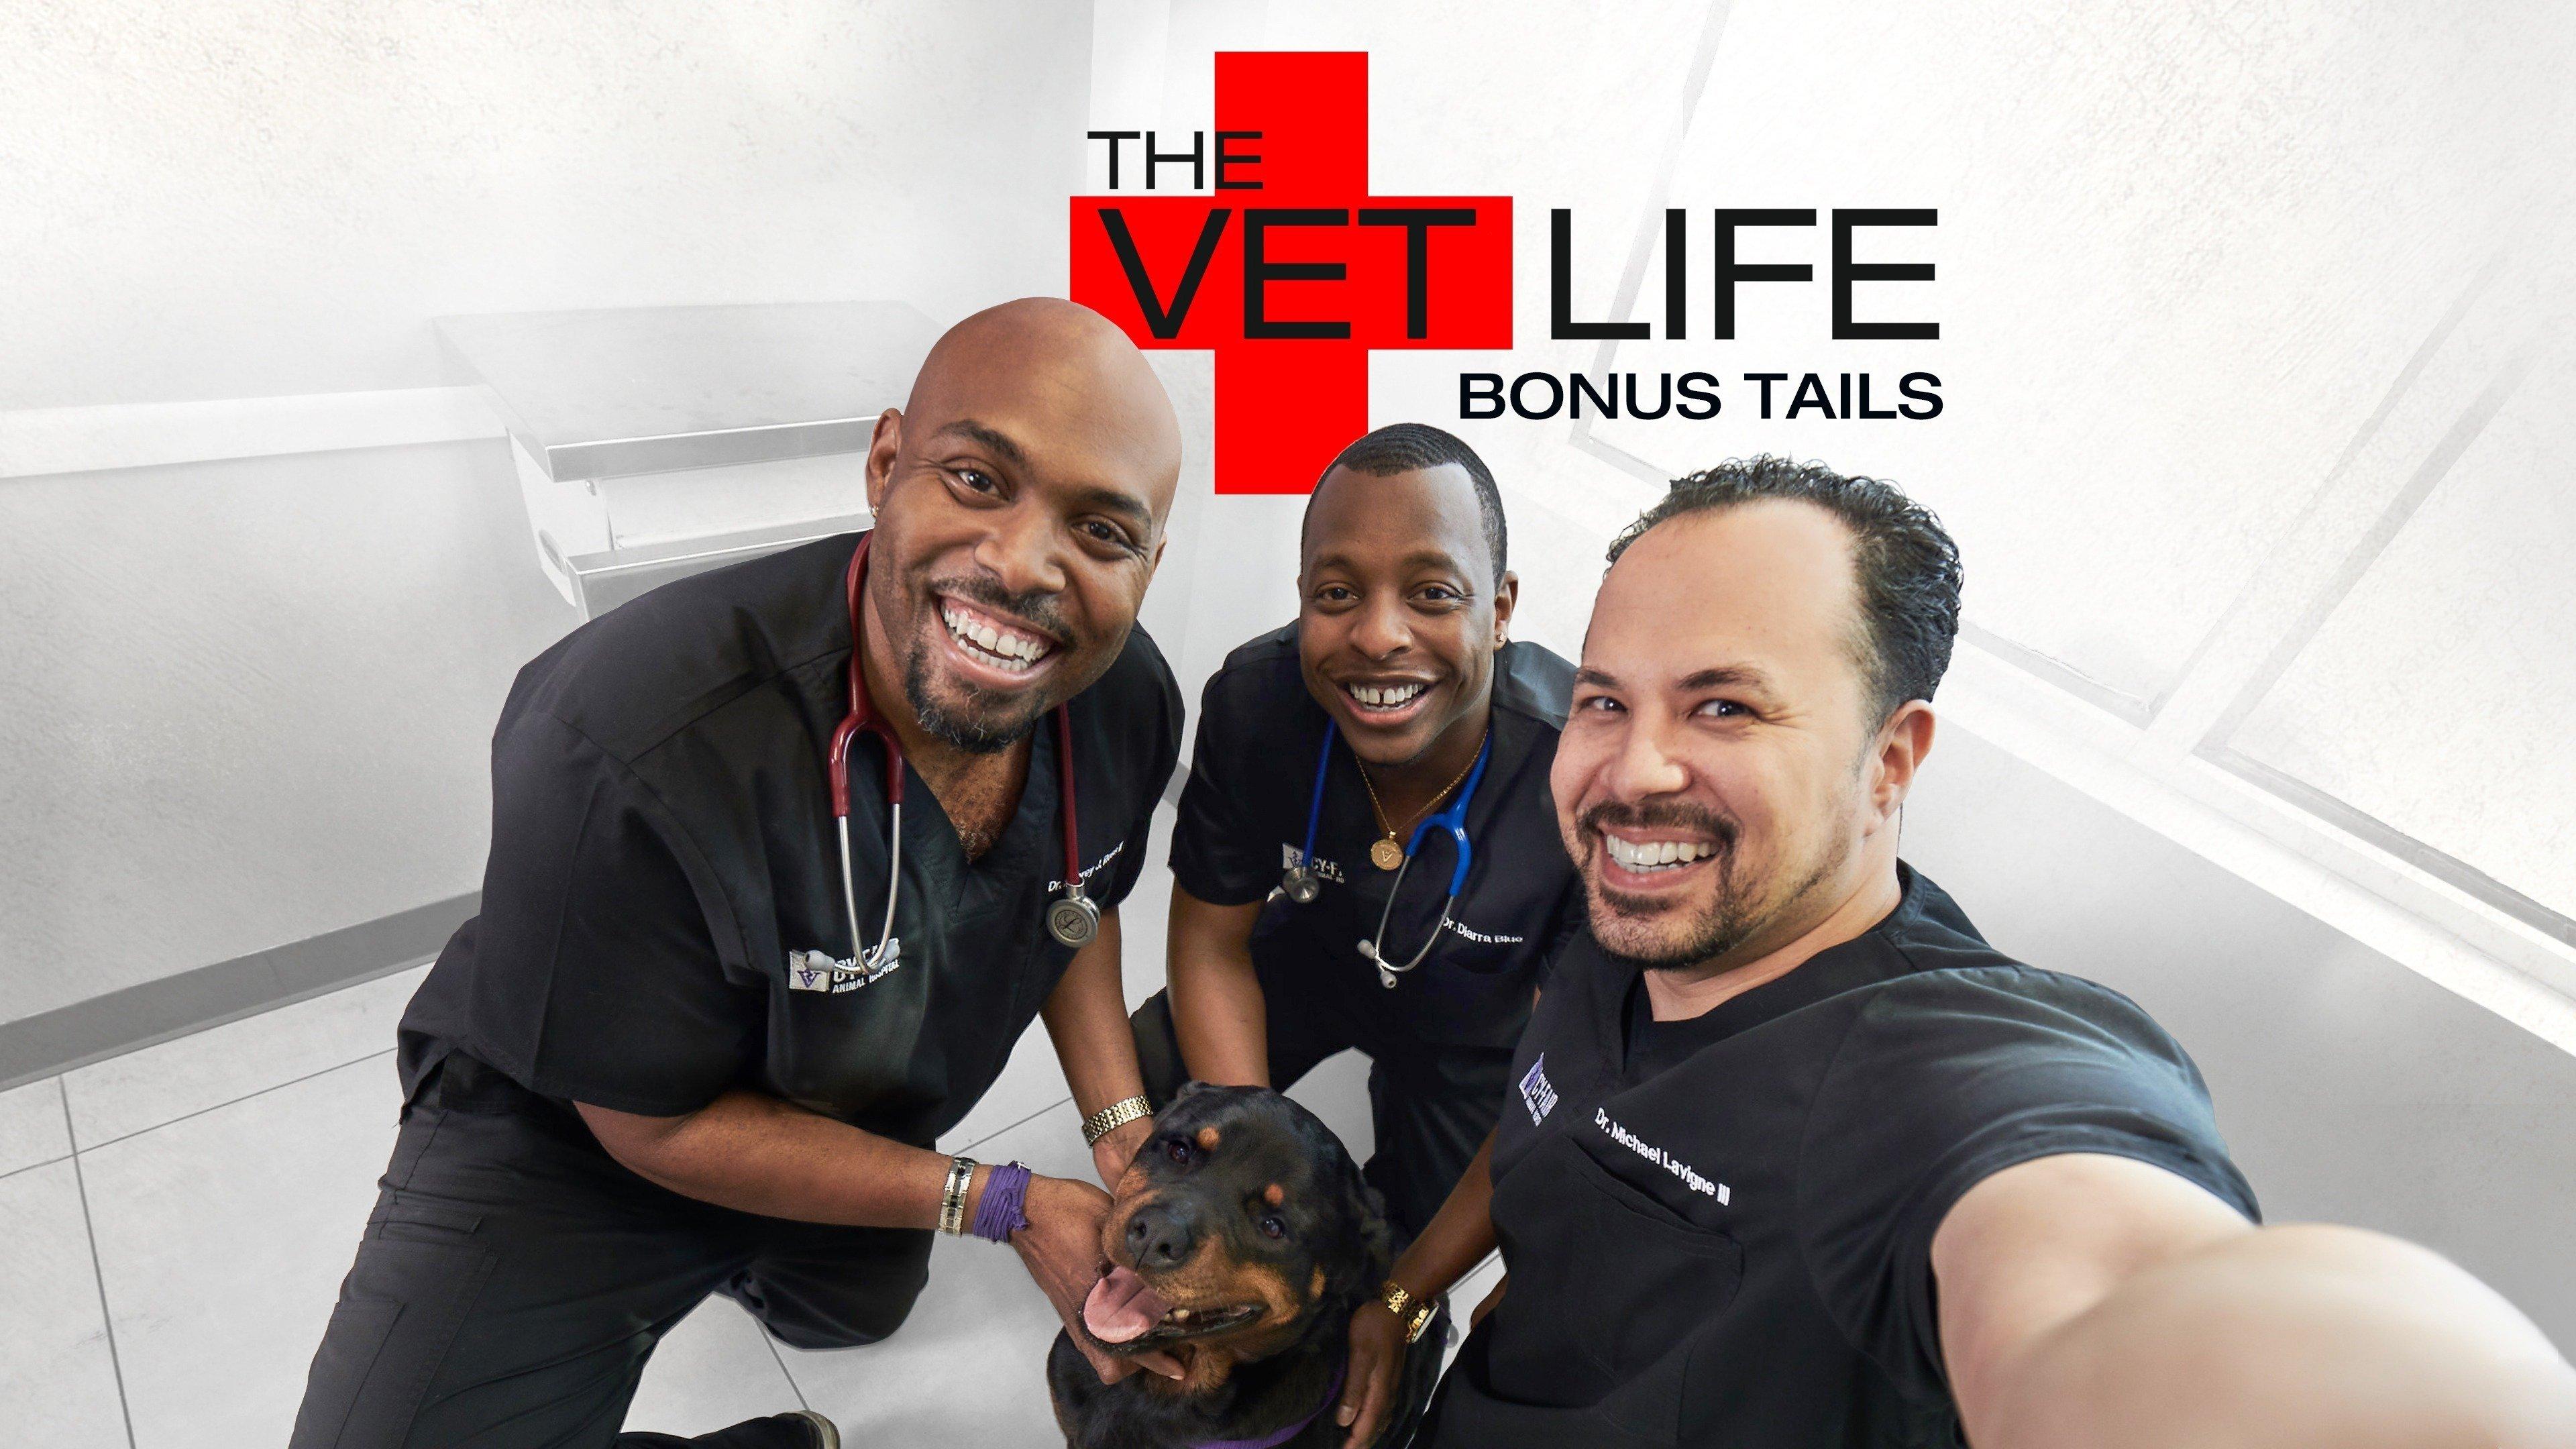 Watch The Vet Life Bonus Tails Streaming Online on Philo (Free Trial)